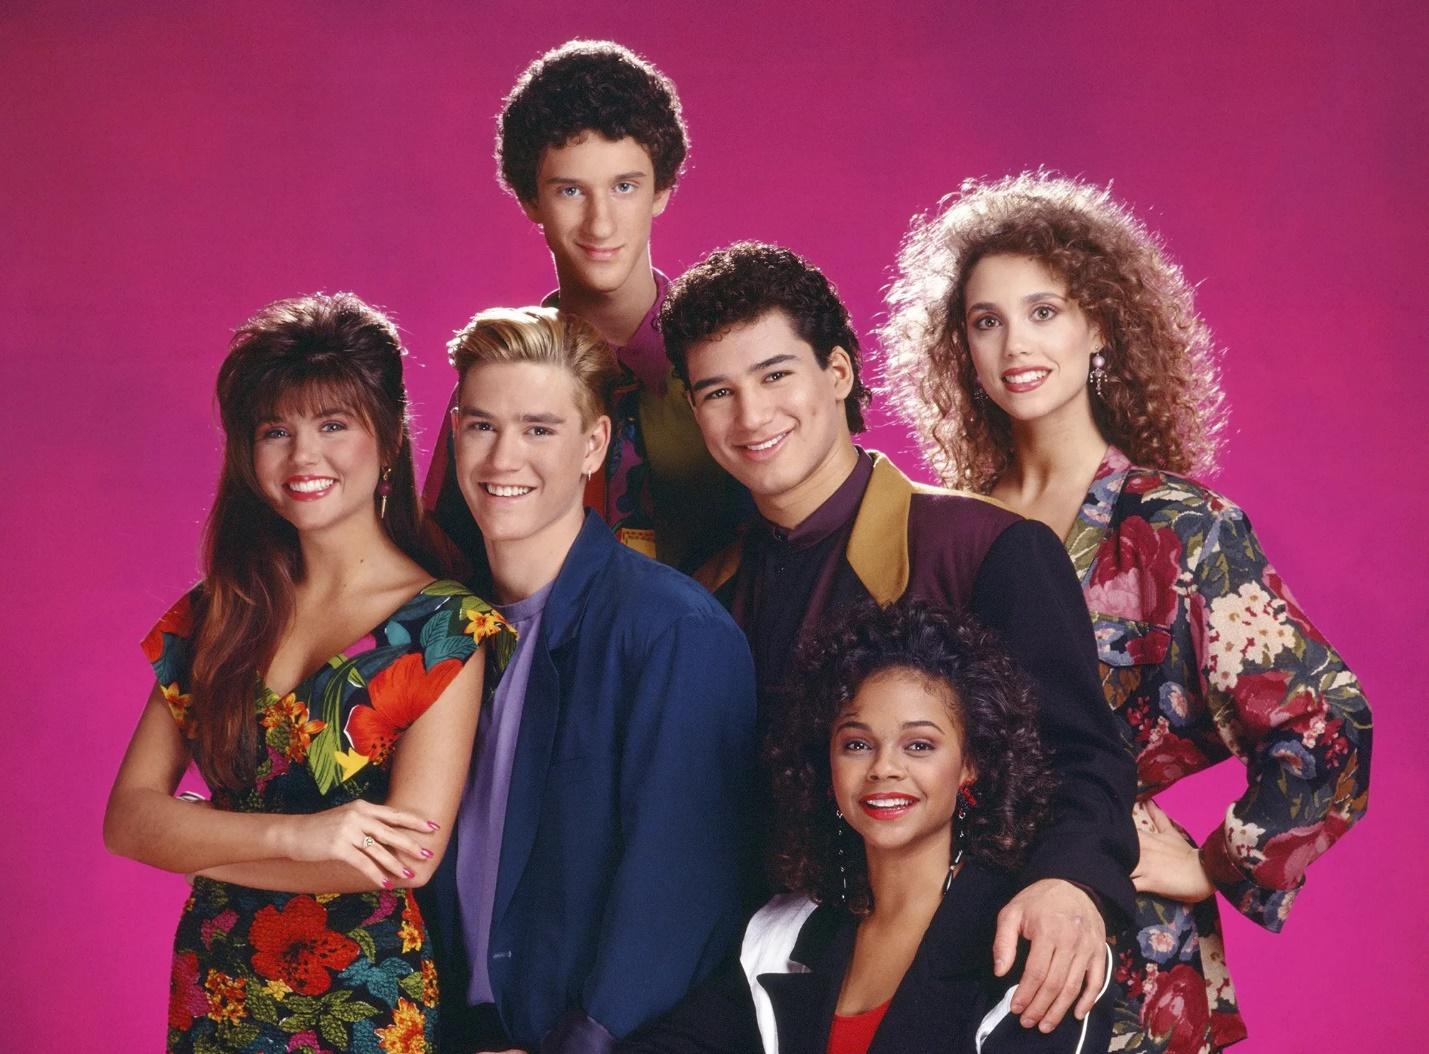 Saved by the Bell’s fashion and their fashionistas. 